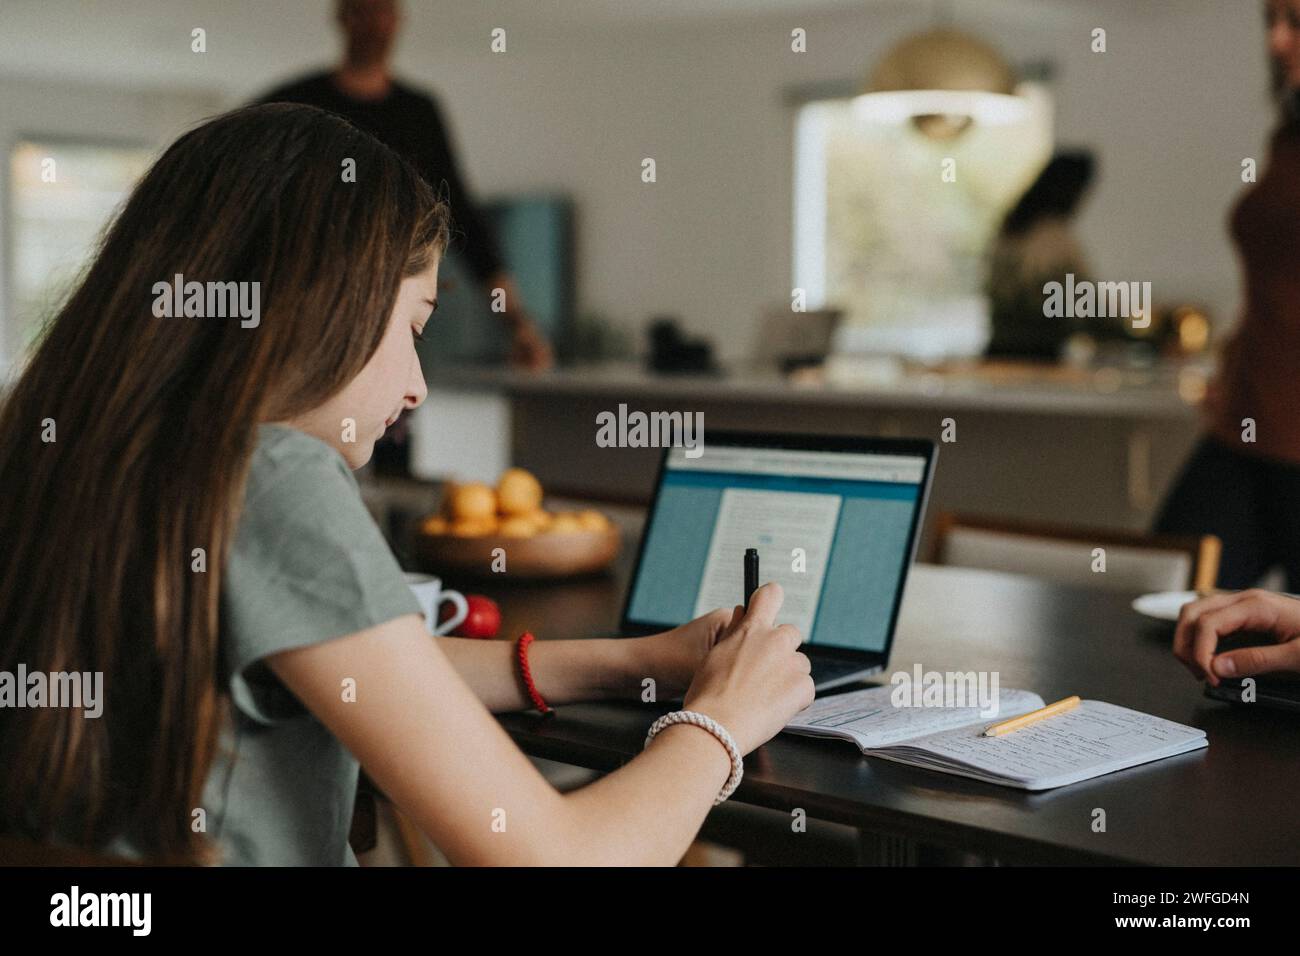 Pre-Adolescent girl using laptop while sitting at home Stock Photo